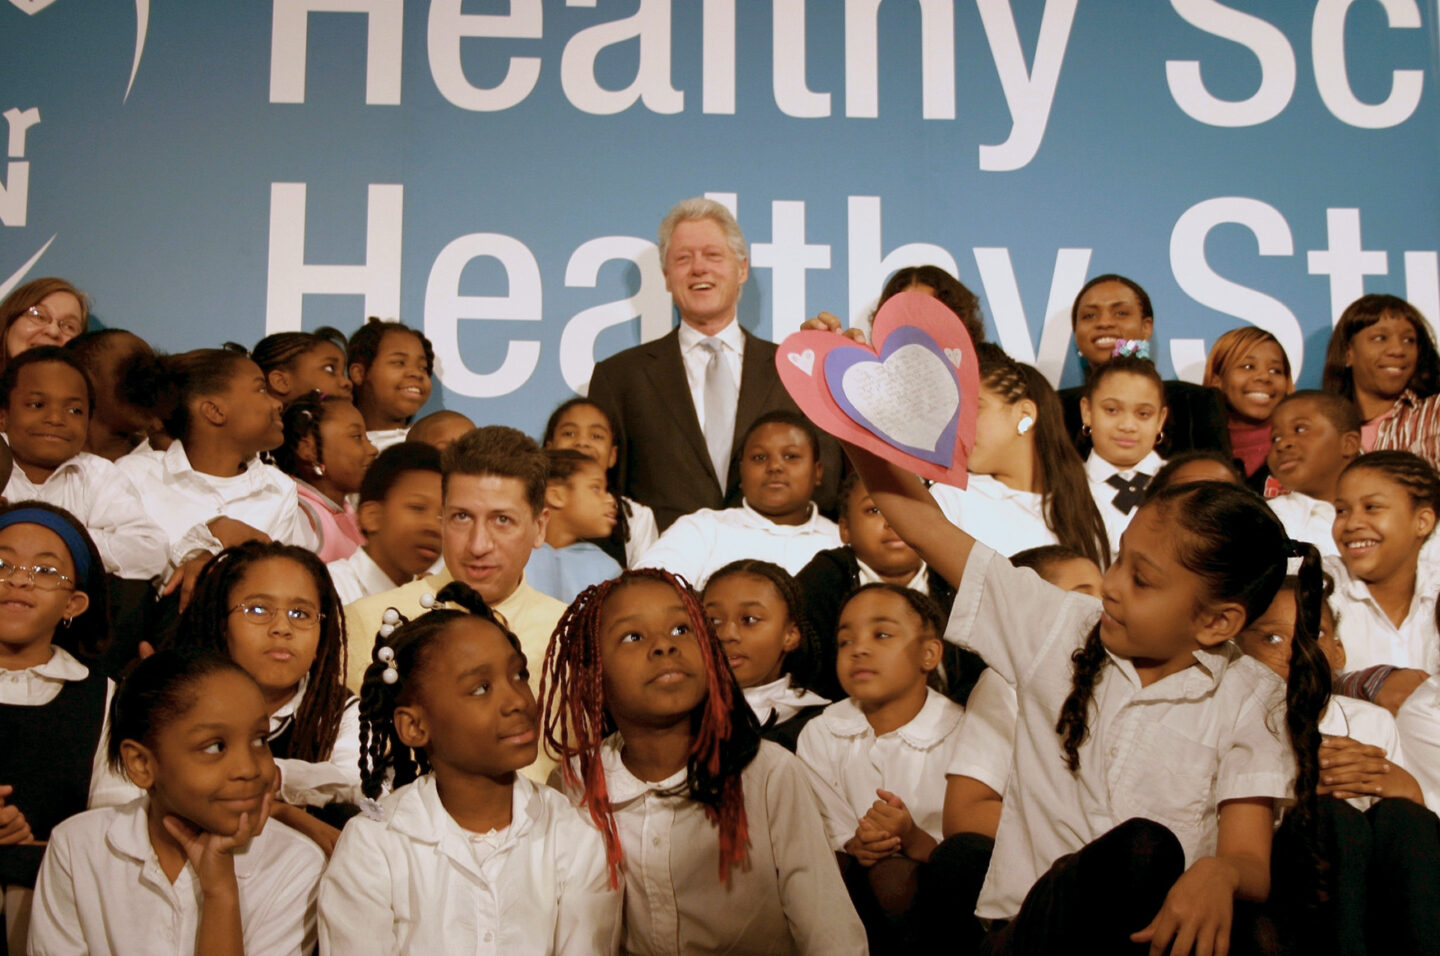 President Clinton takes a photo with a group of students